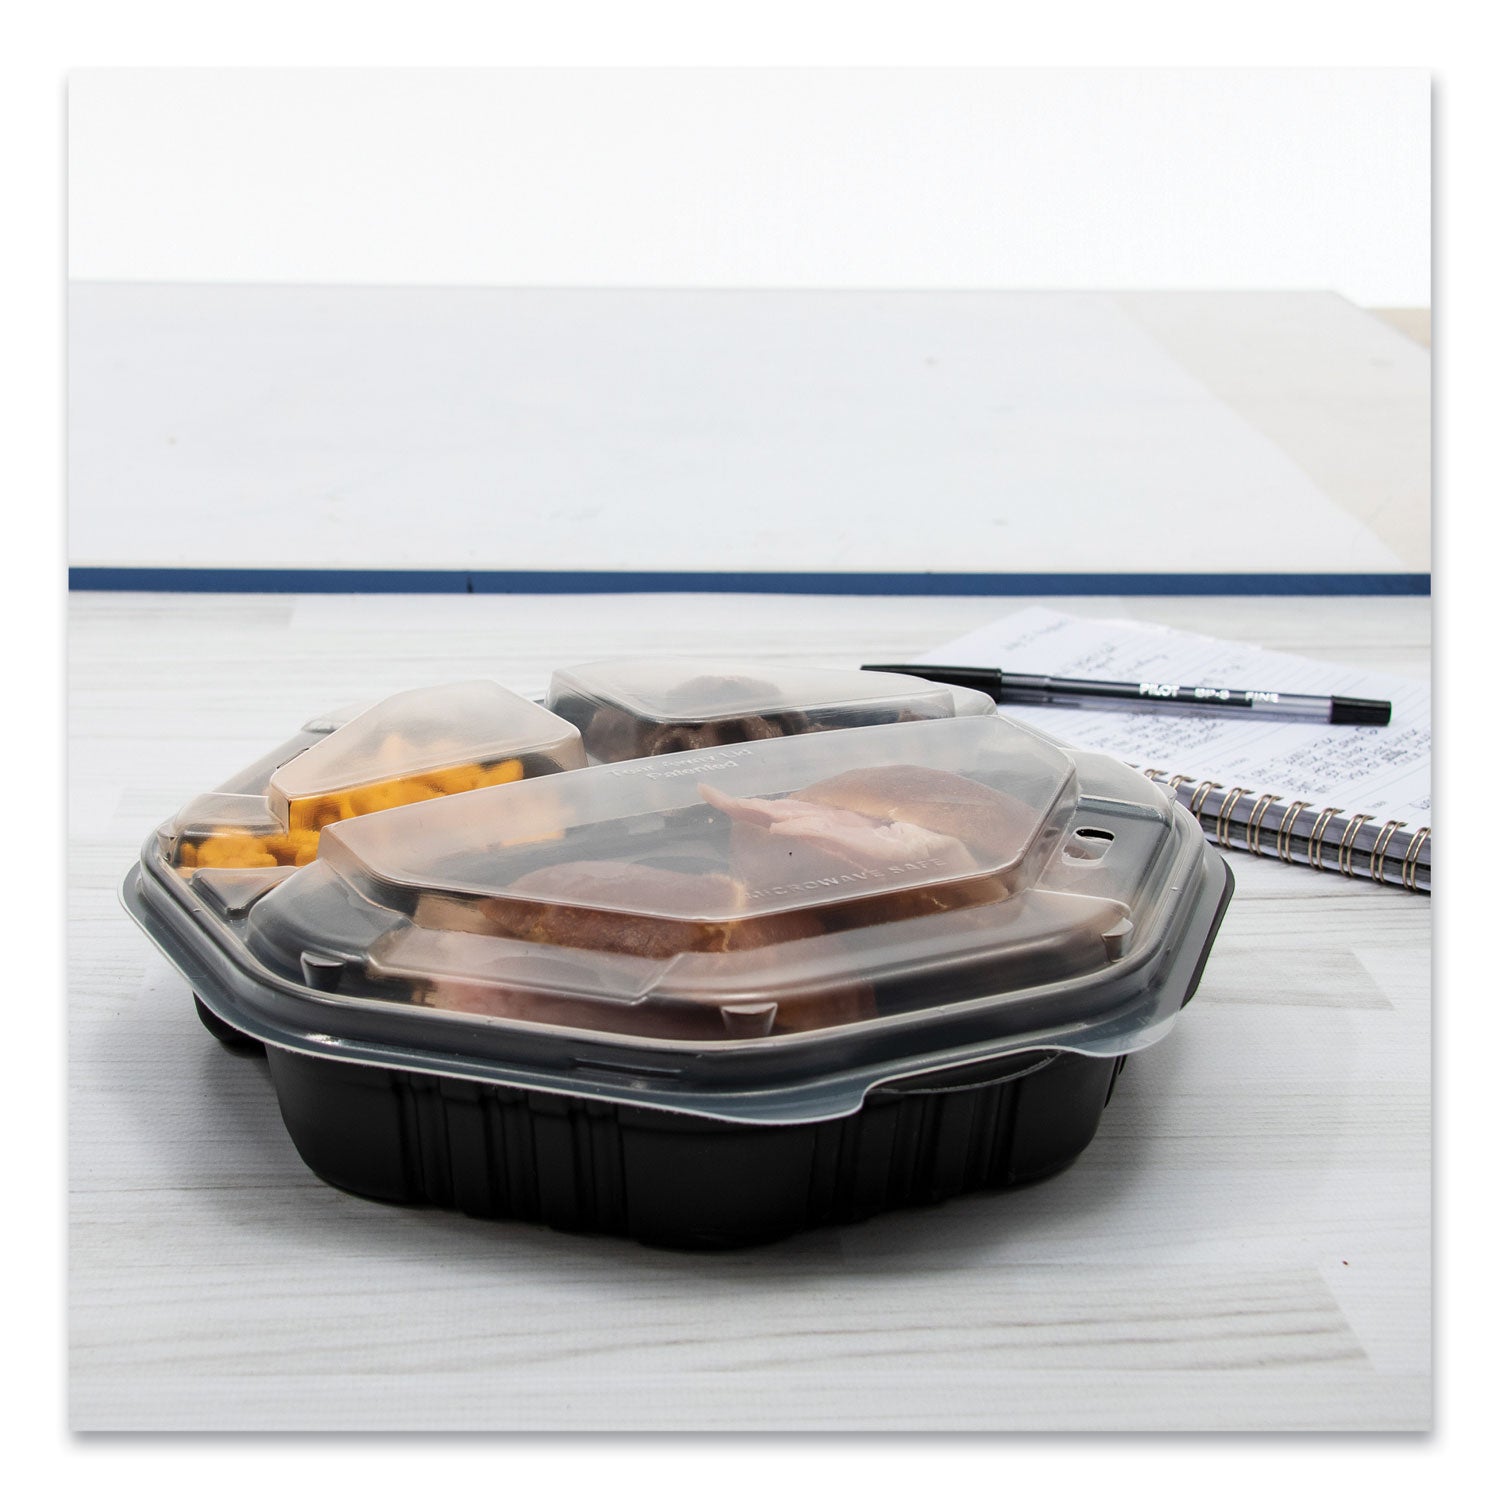 octaview-hinged-lid-hot-food-containers-3-compartment-38-oz-955-x-91-x-24-black-clear-plastic-100-carton_scc809014pp94 - 3